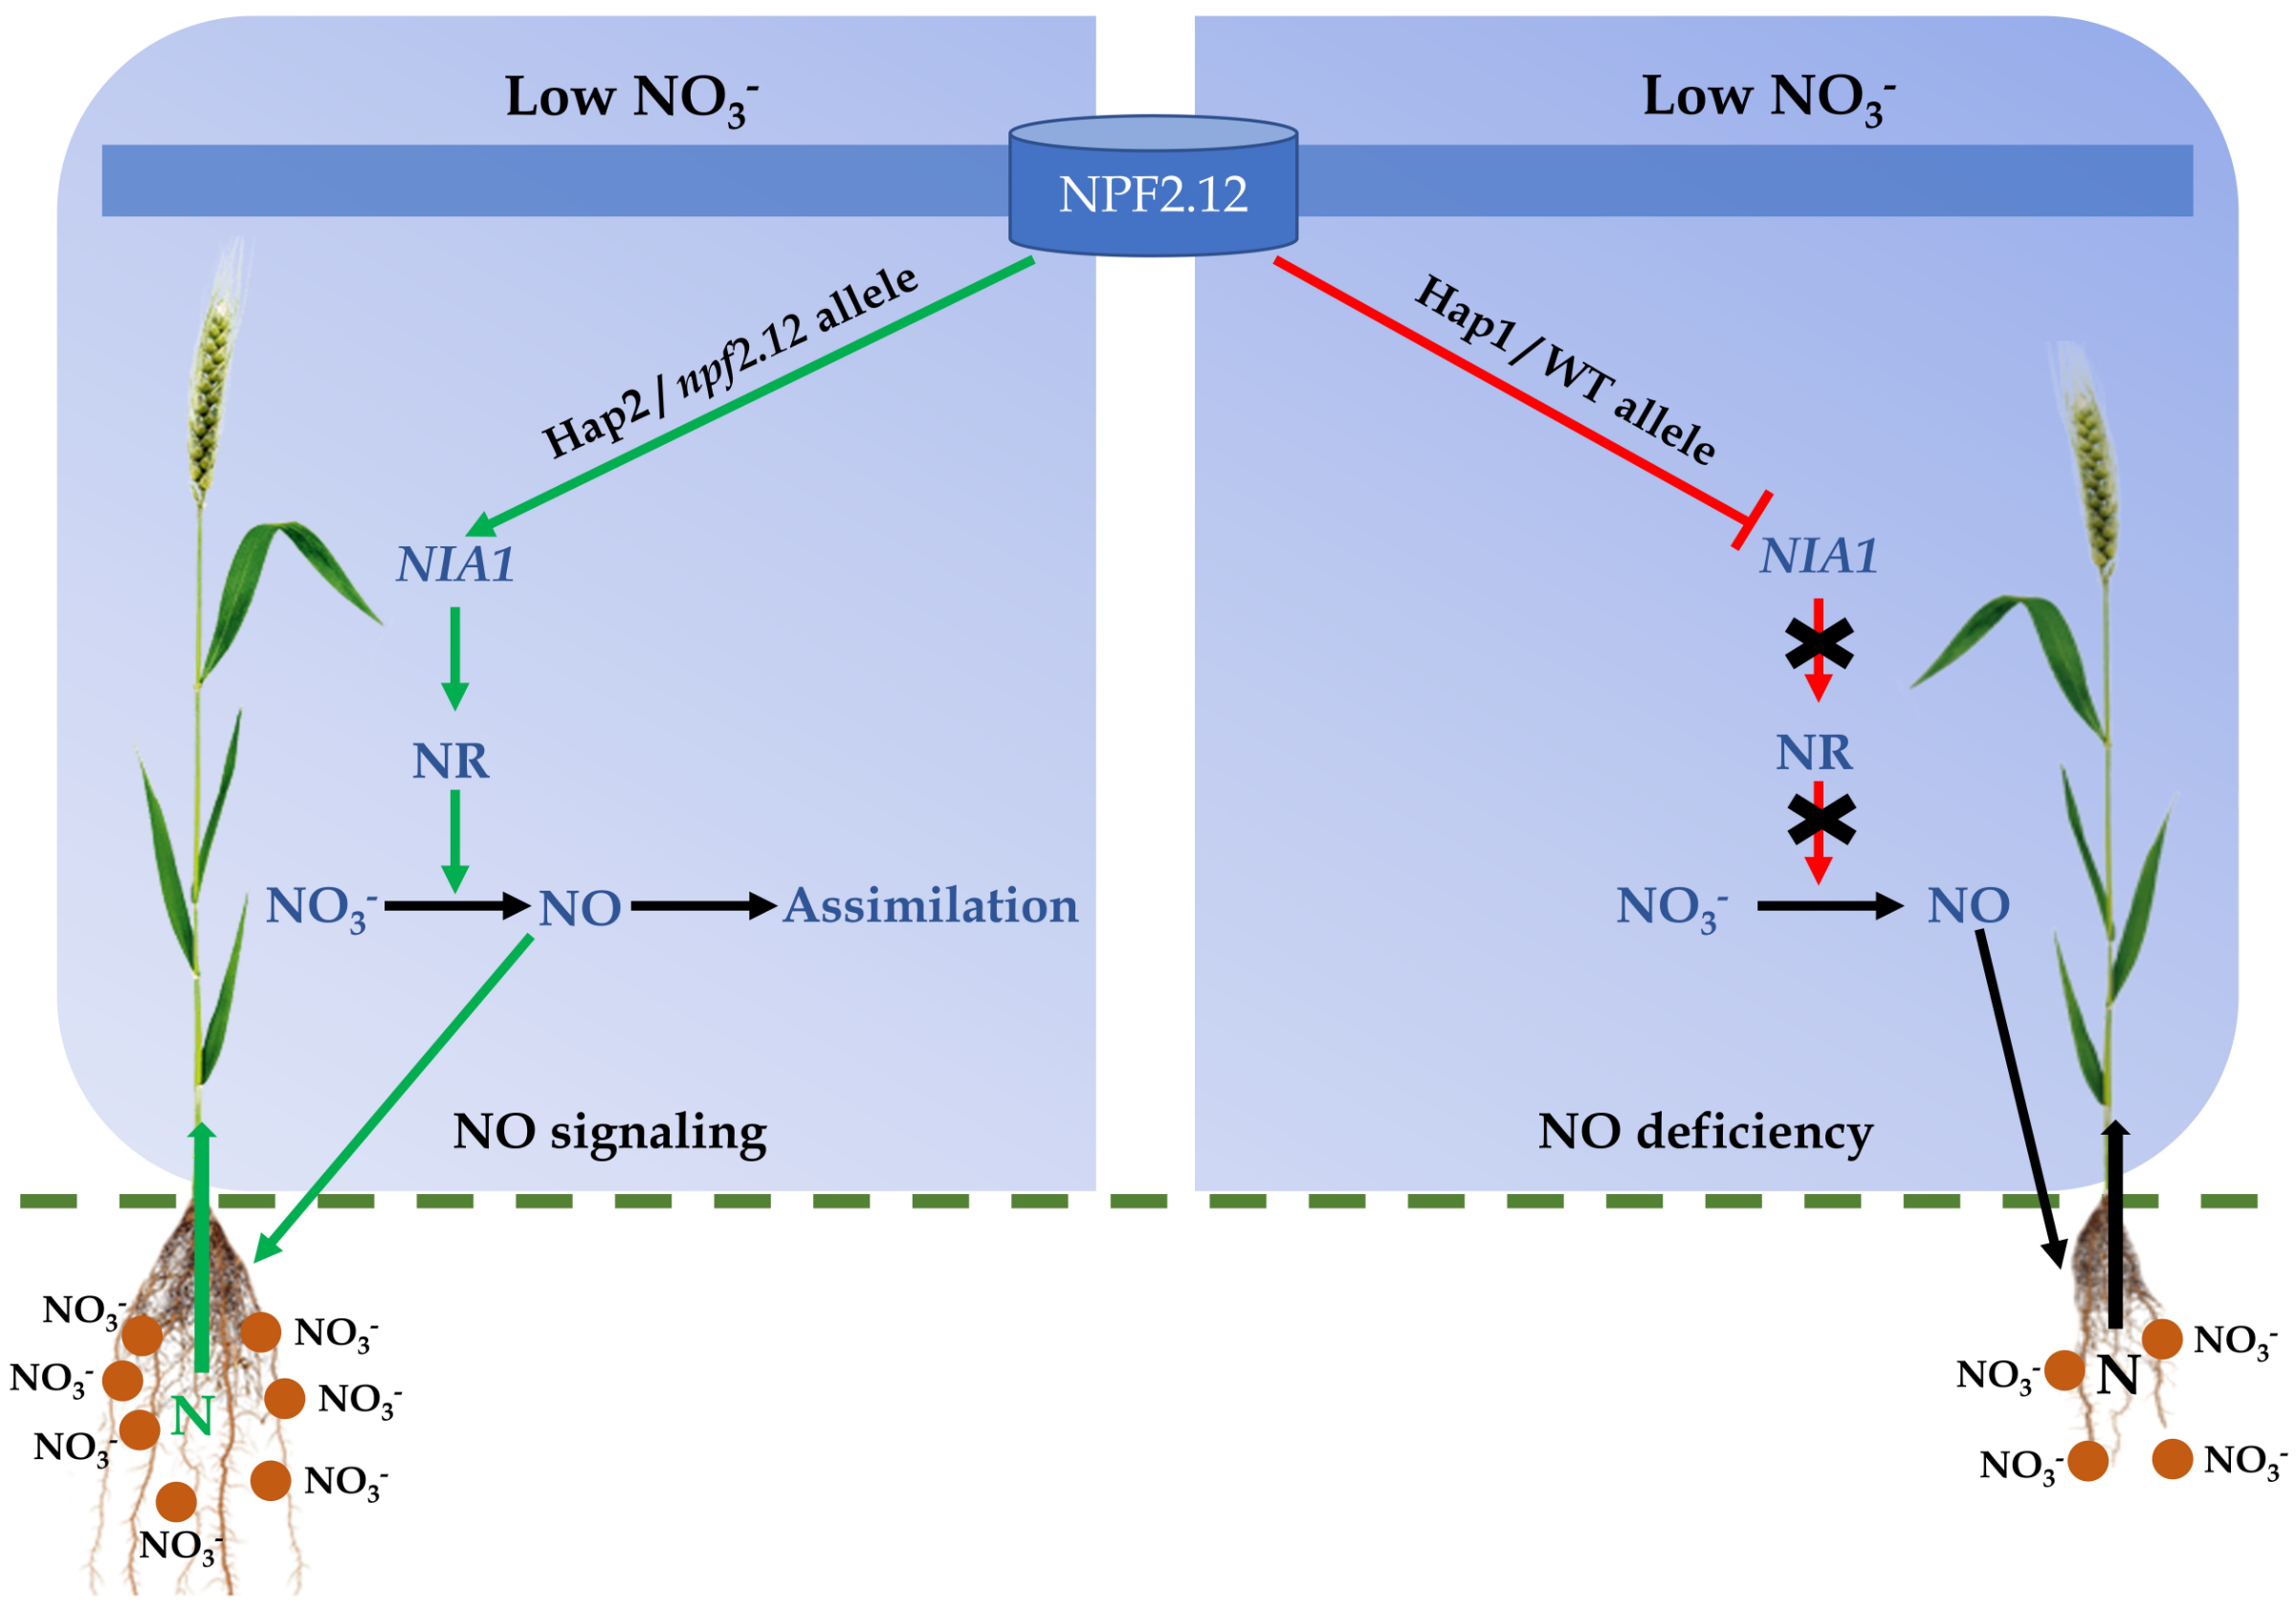 If nitrogen levels in the soil are low, wheat varieties with a favorable NPF2.12 gene variant (left) initiate an important signaling cascade